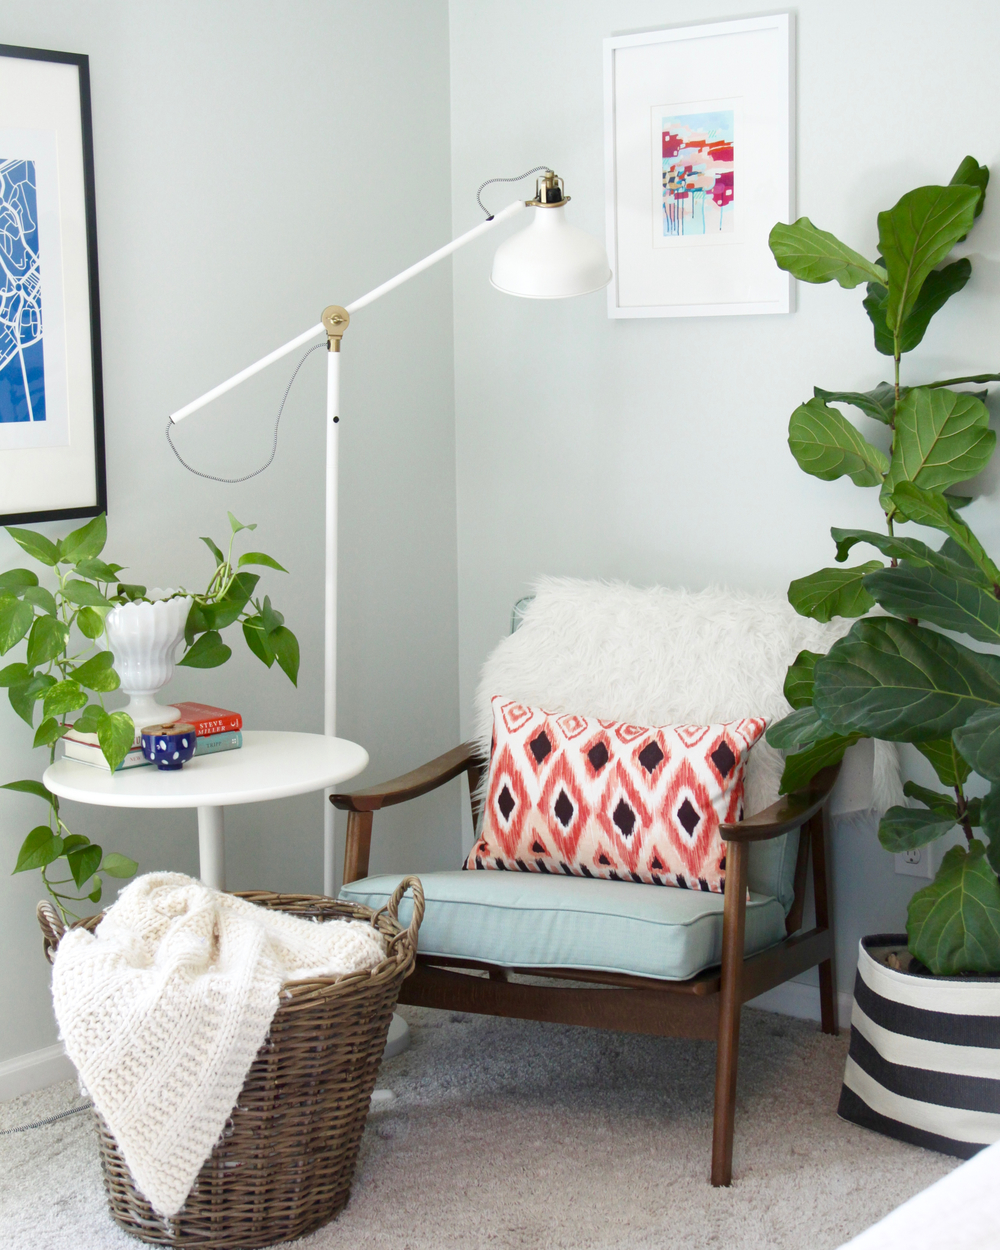 Midcentury Chair in Bedroom Corner with Fiddle Leaf Fig